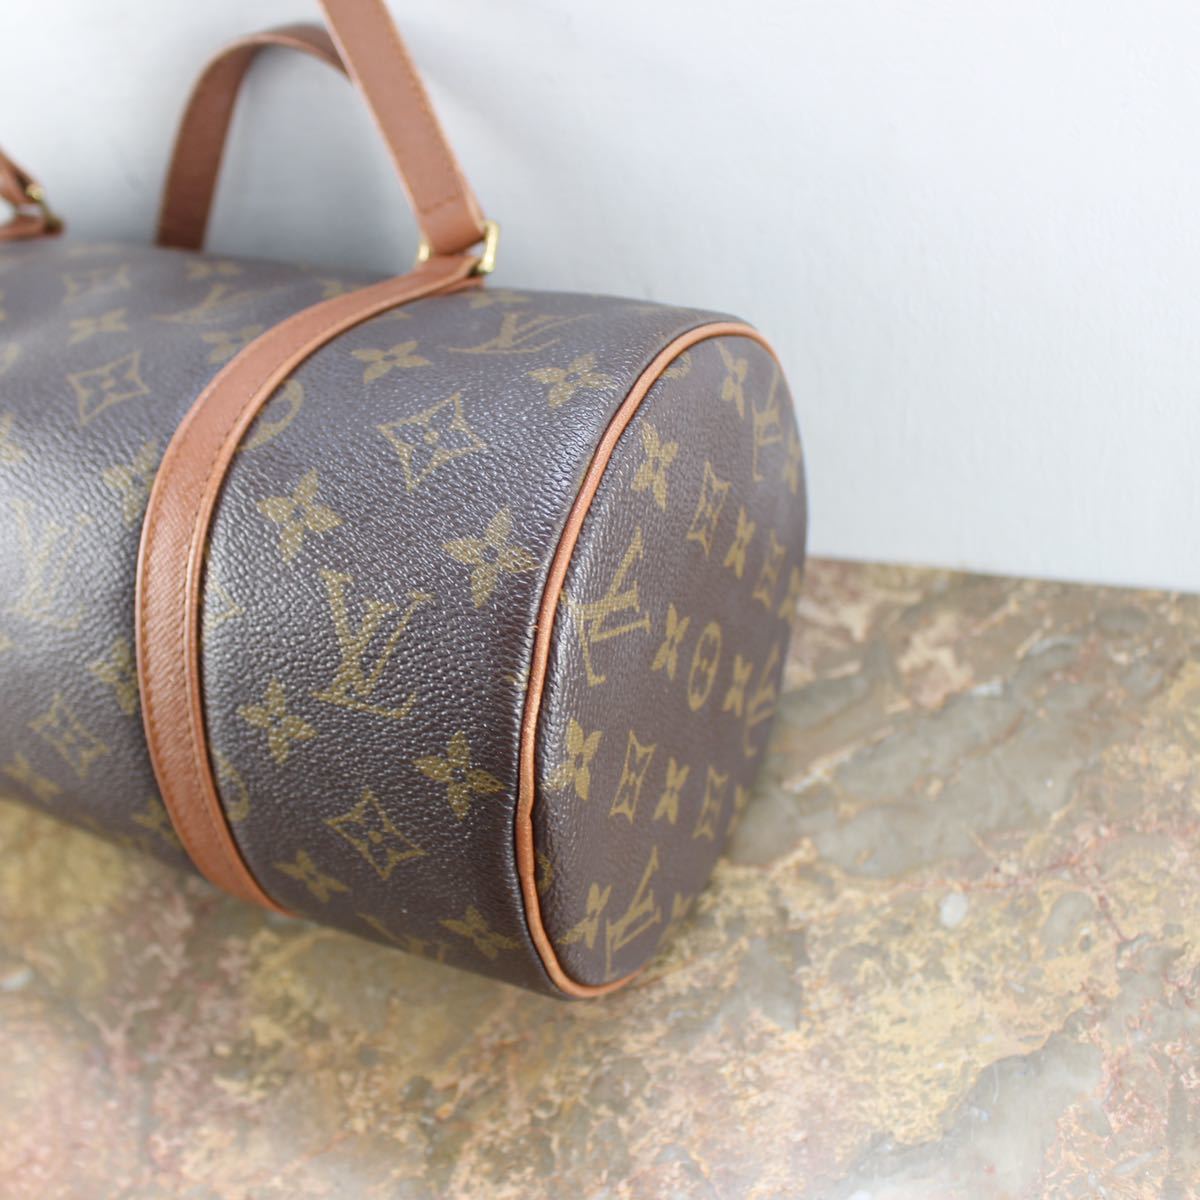 LOUIS VUITTON M51366 NO0956 MONOGRAM PATTERNED HAND BAG MADE IN